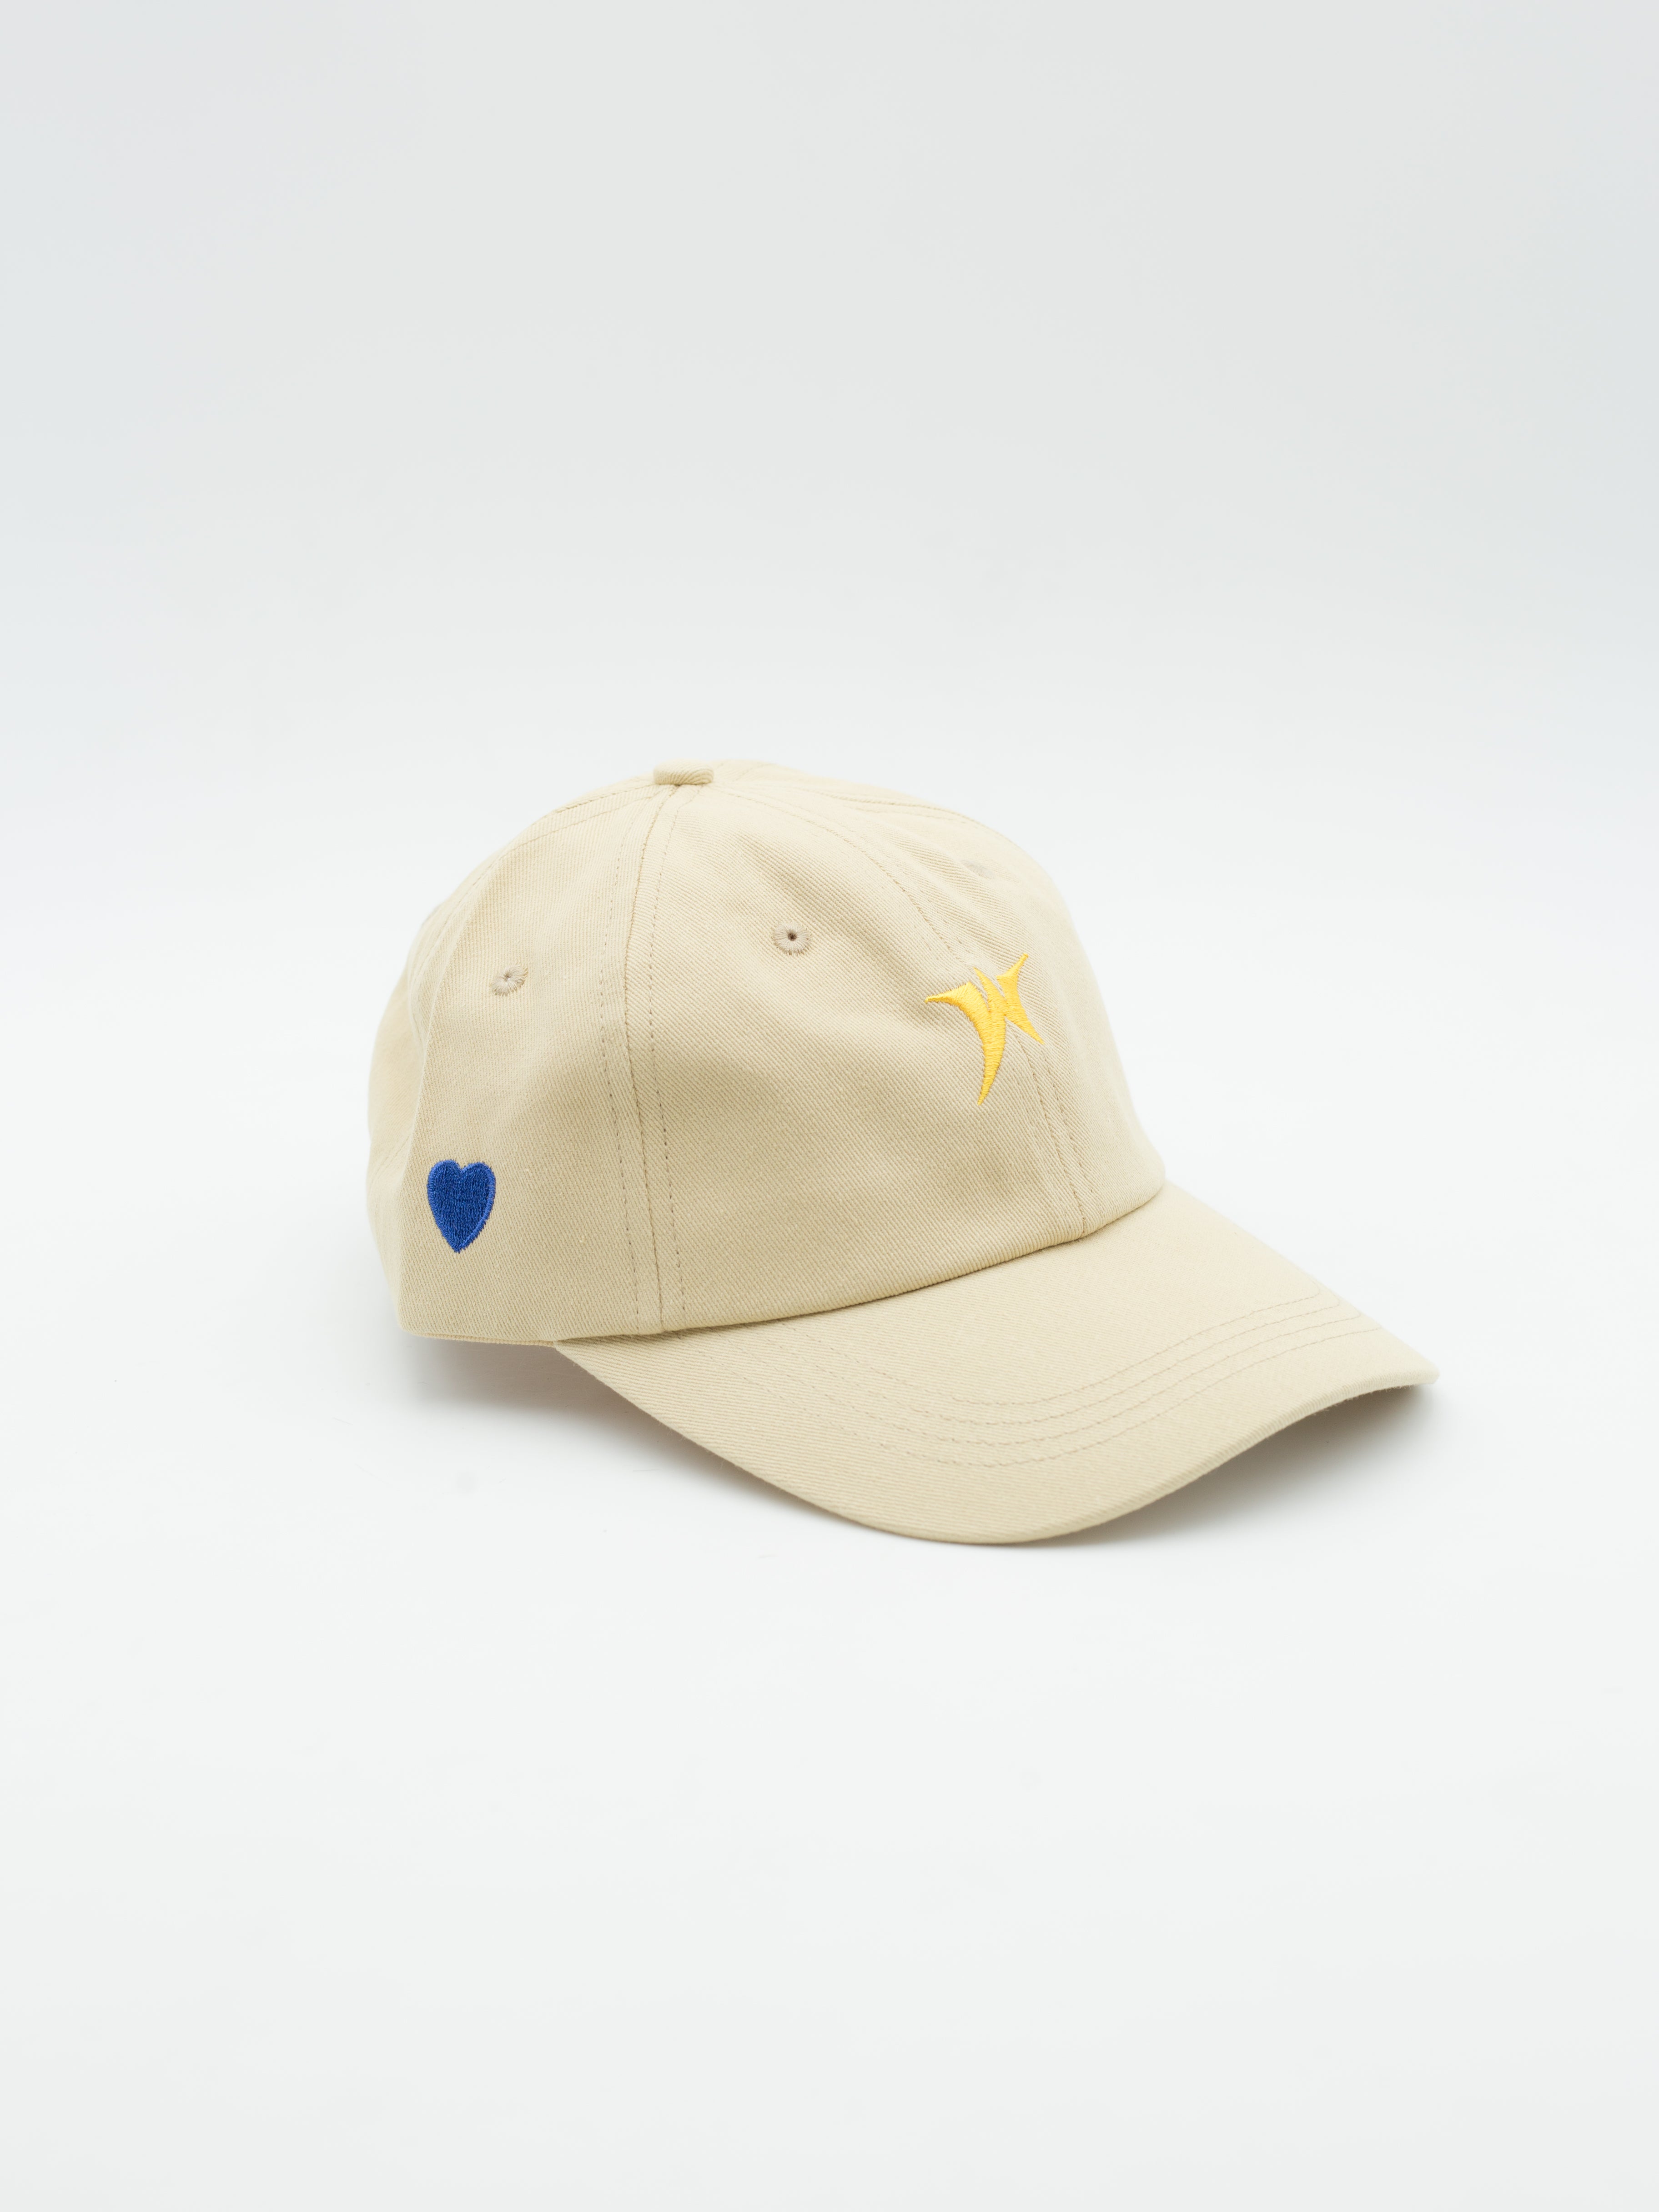 The W Gold Hat